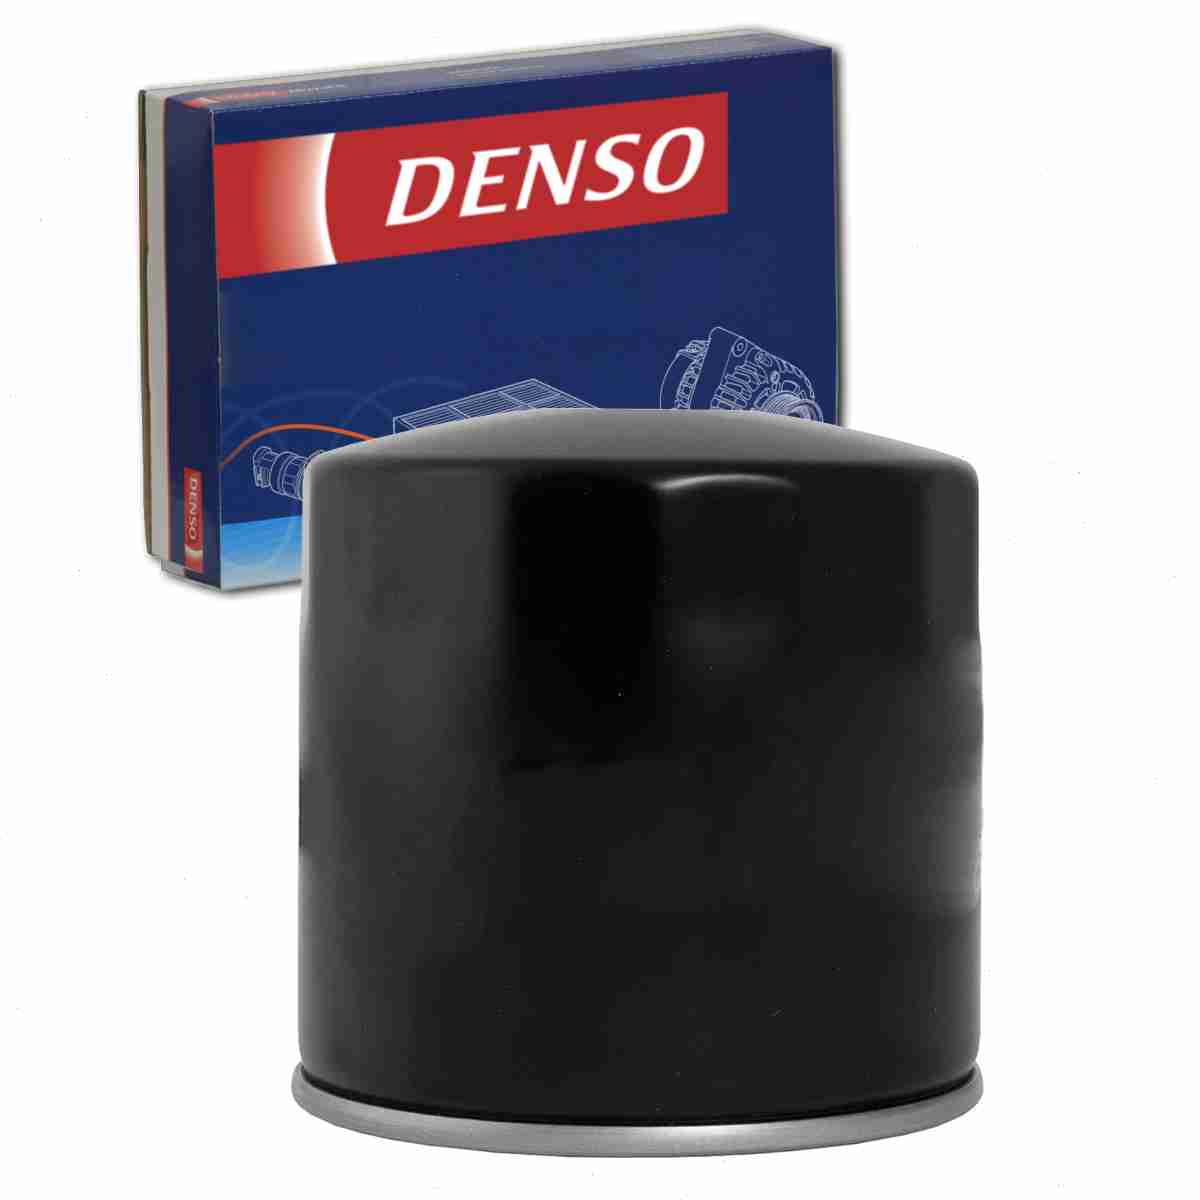 DENSO Engine Oil Filter compatible with Jeep Grand Cherokee        L6 V8 1993-2007 Oil Change Lubricant Filters 